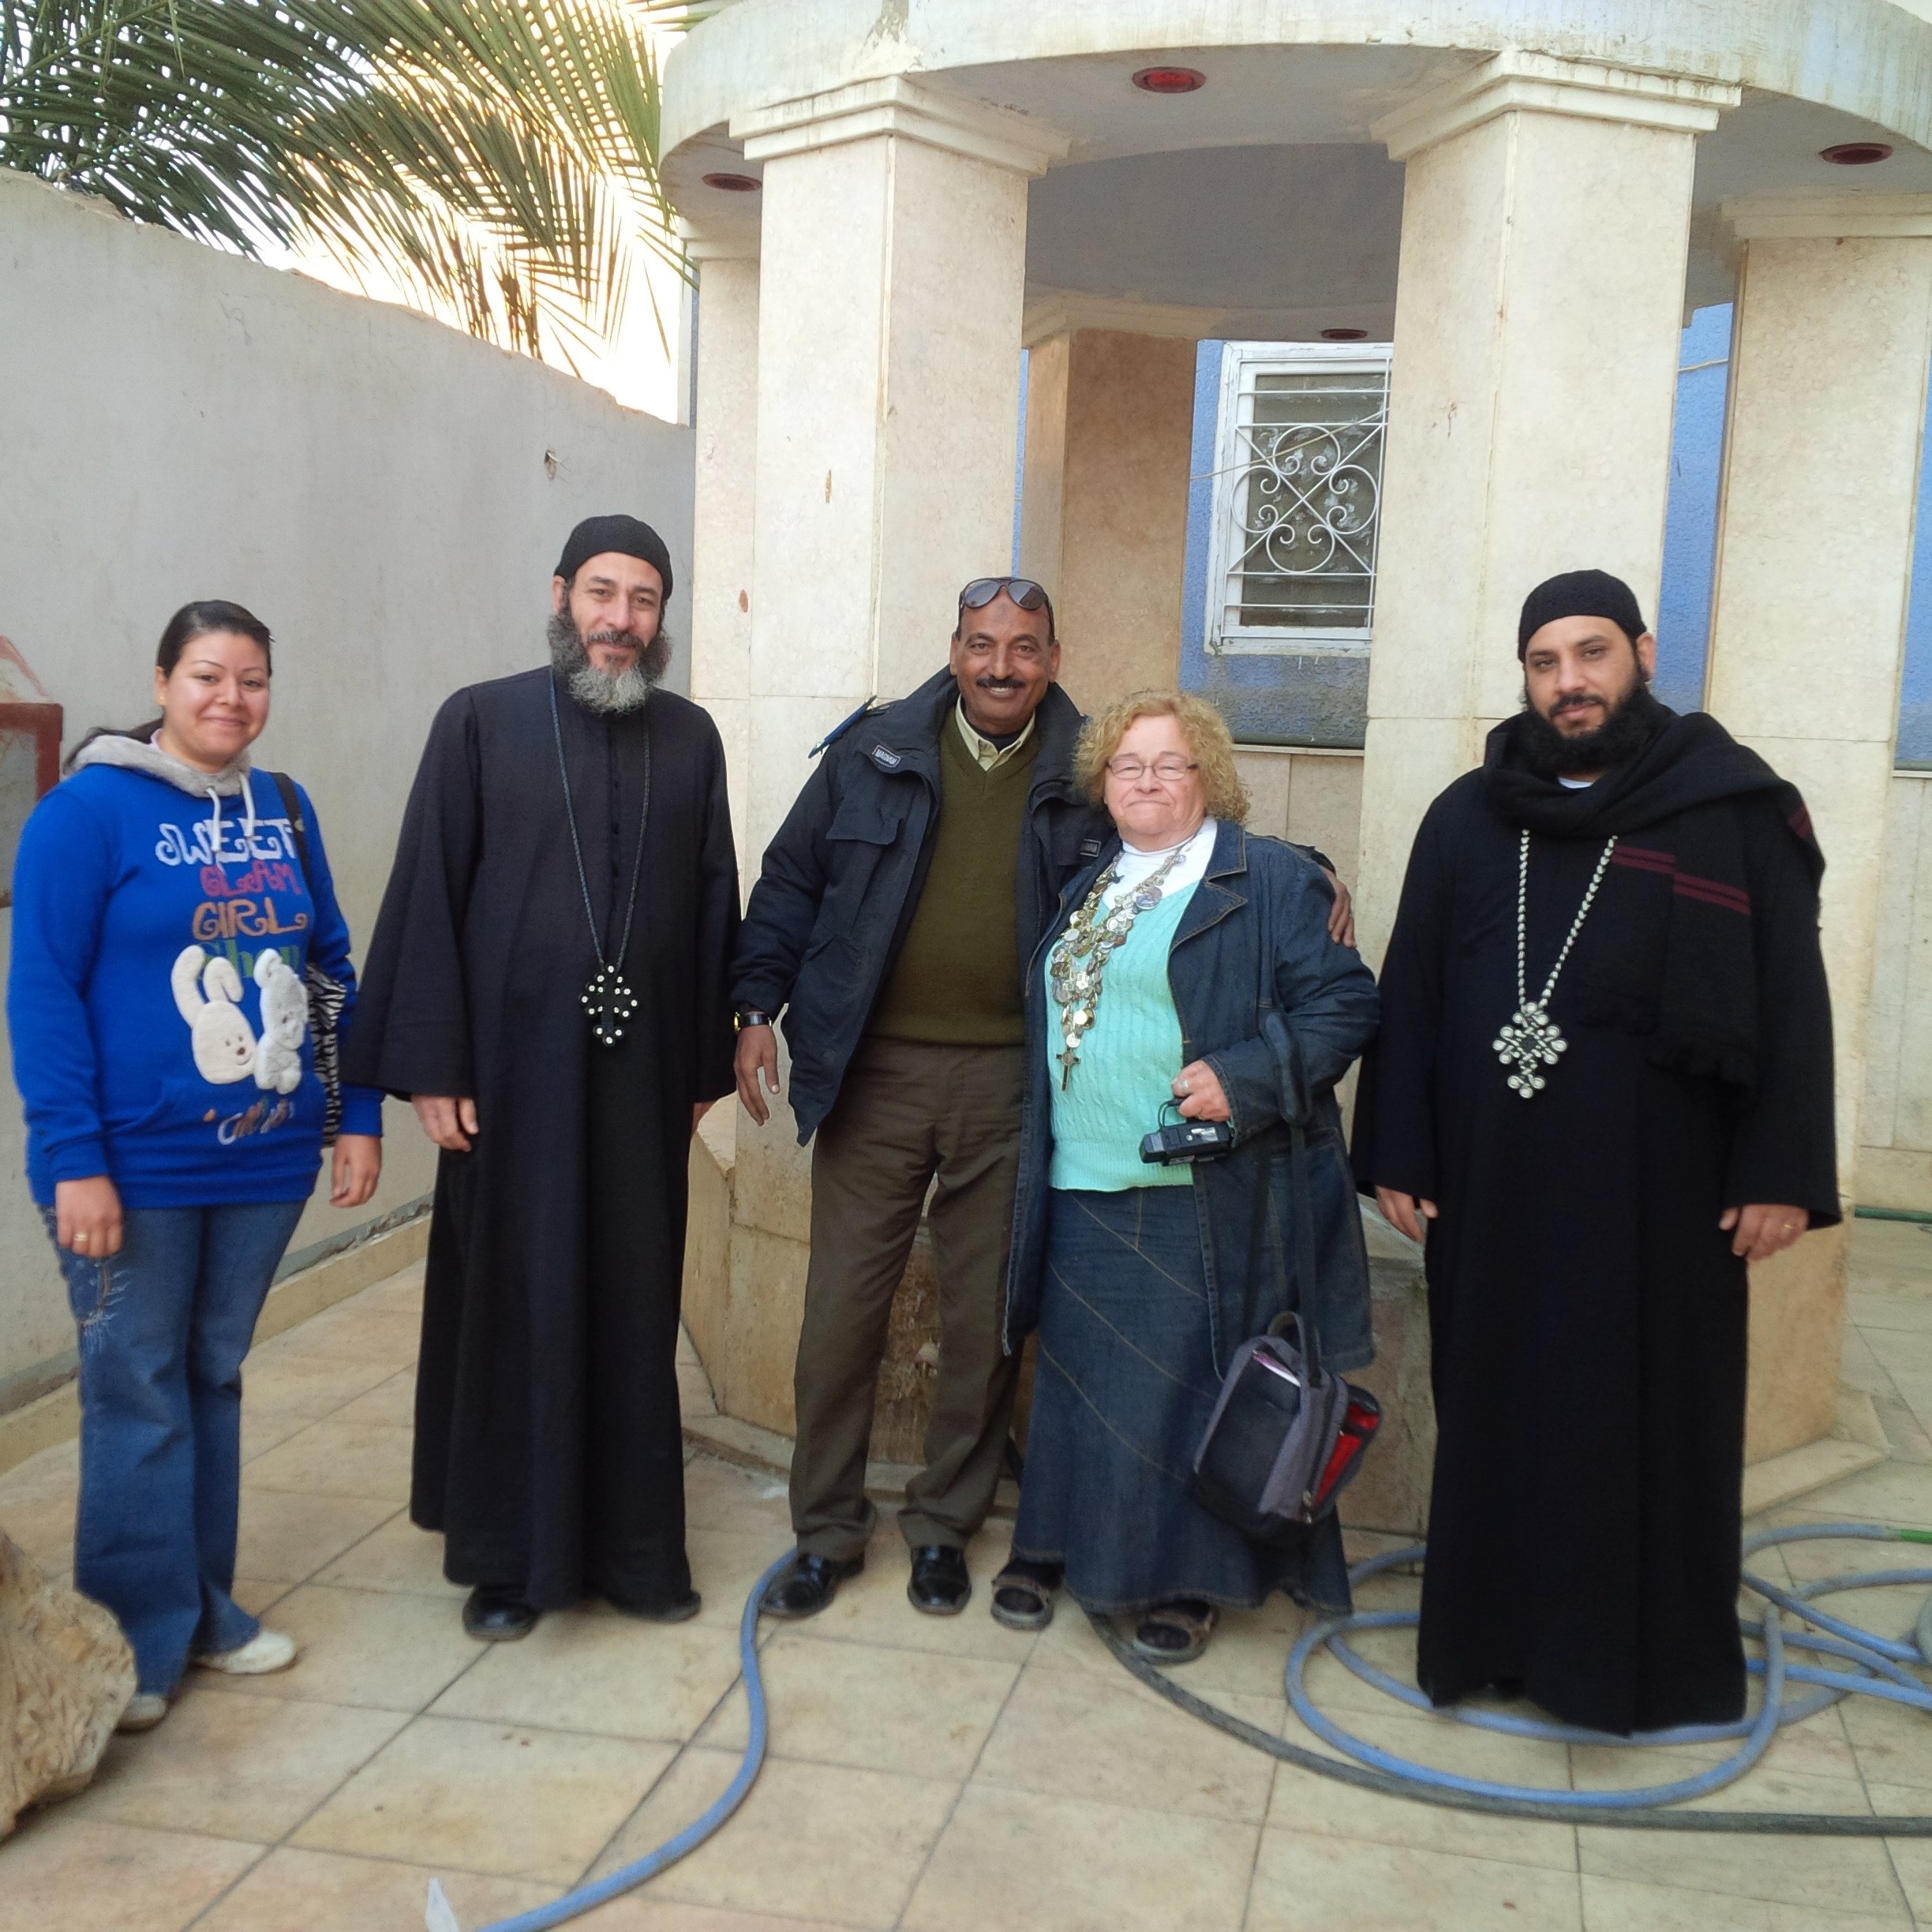 Friend, Priests AND SECURITY
by the well in Church Courtyard.
Our Lady had Jesus get water.